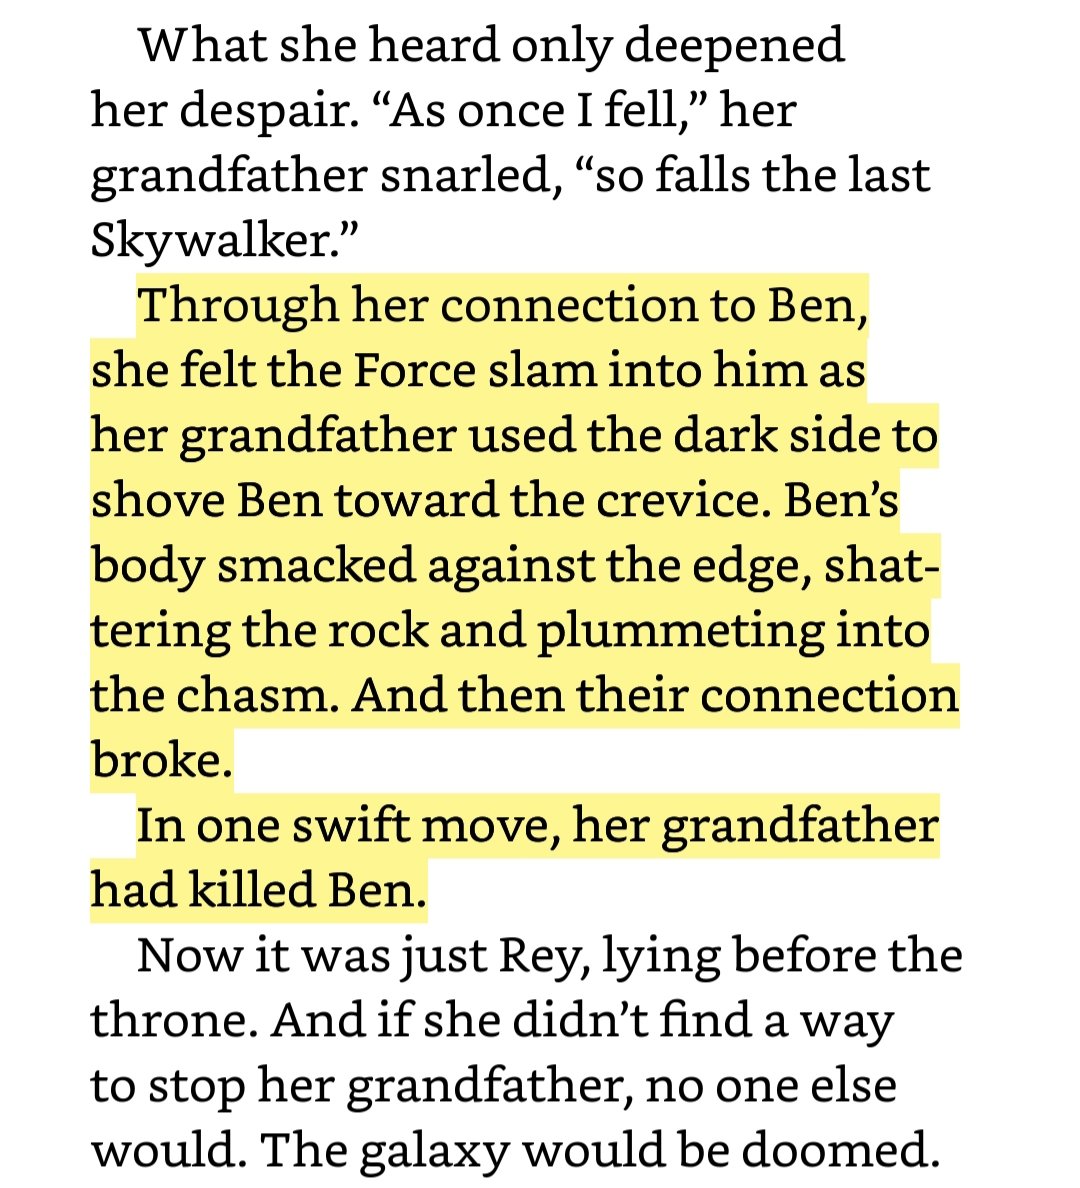 Just like in the regular novel, as soon as Ben falls into the vergence Rey can no longer sense him. What happened in that pit!? I would like to know...